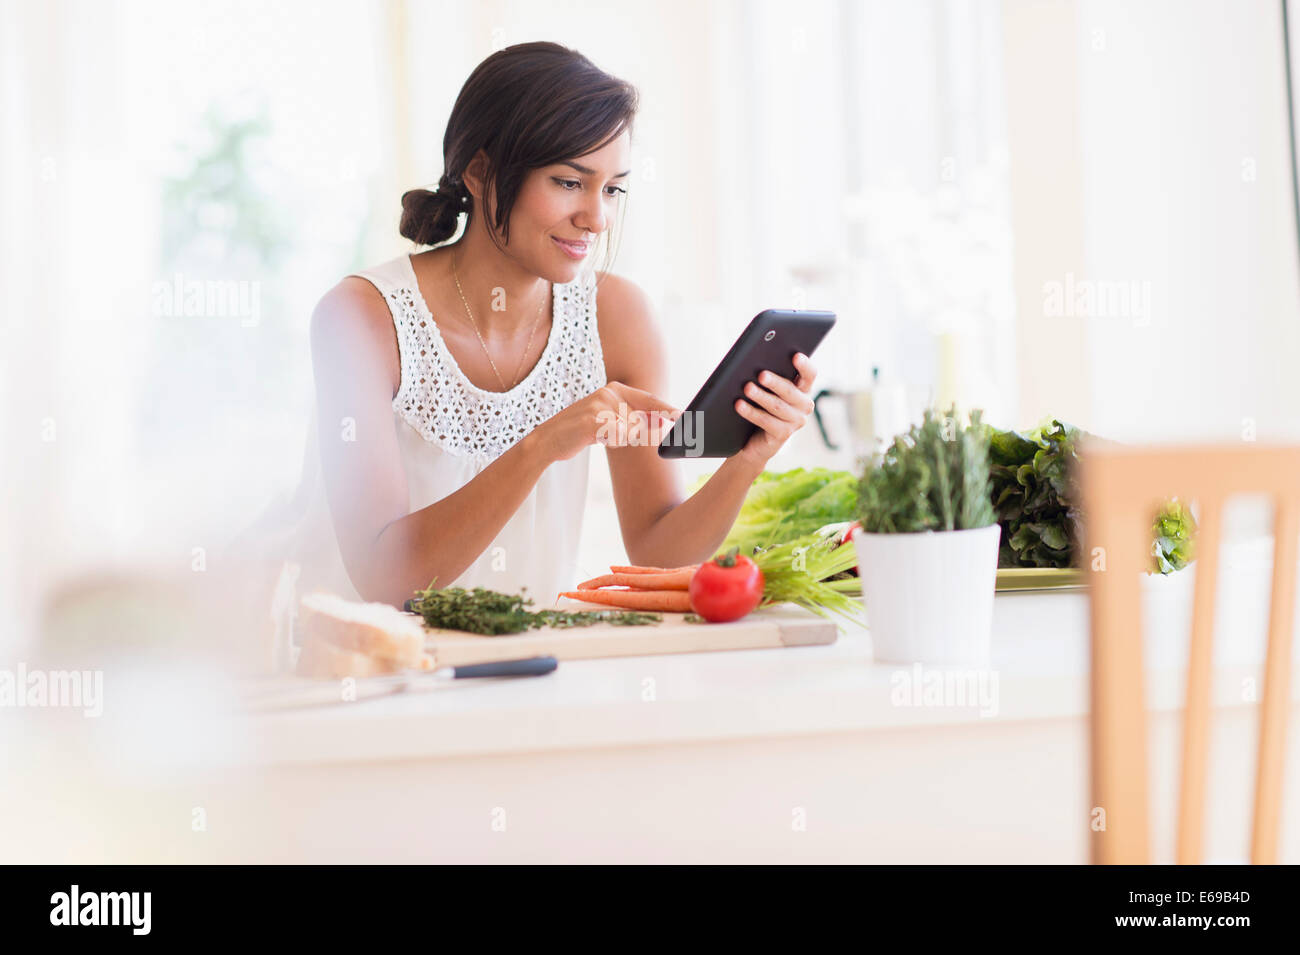 Hispanic woman cooking with digital tablet Banque D'Images